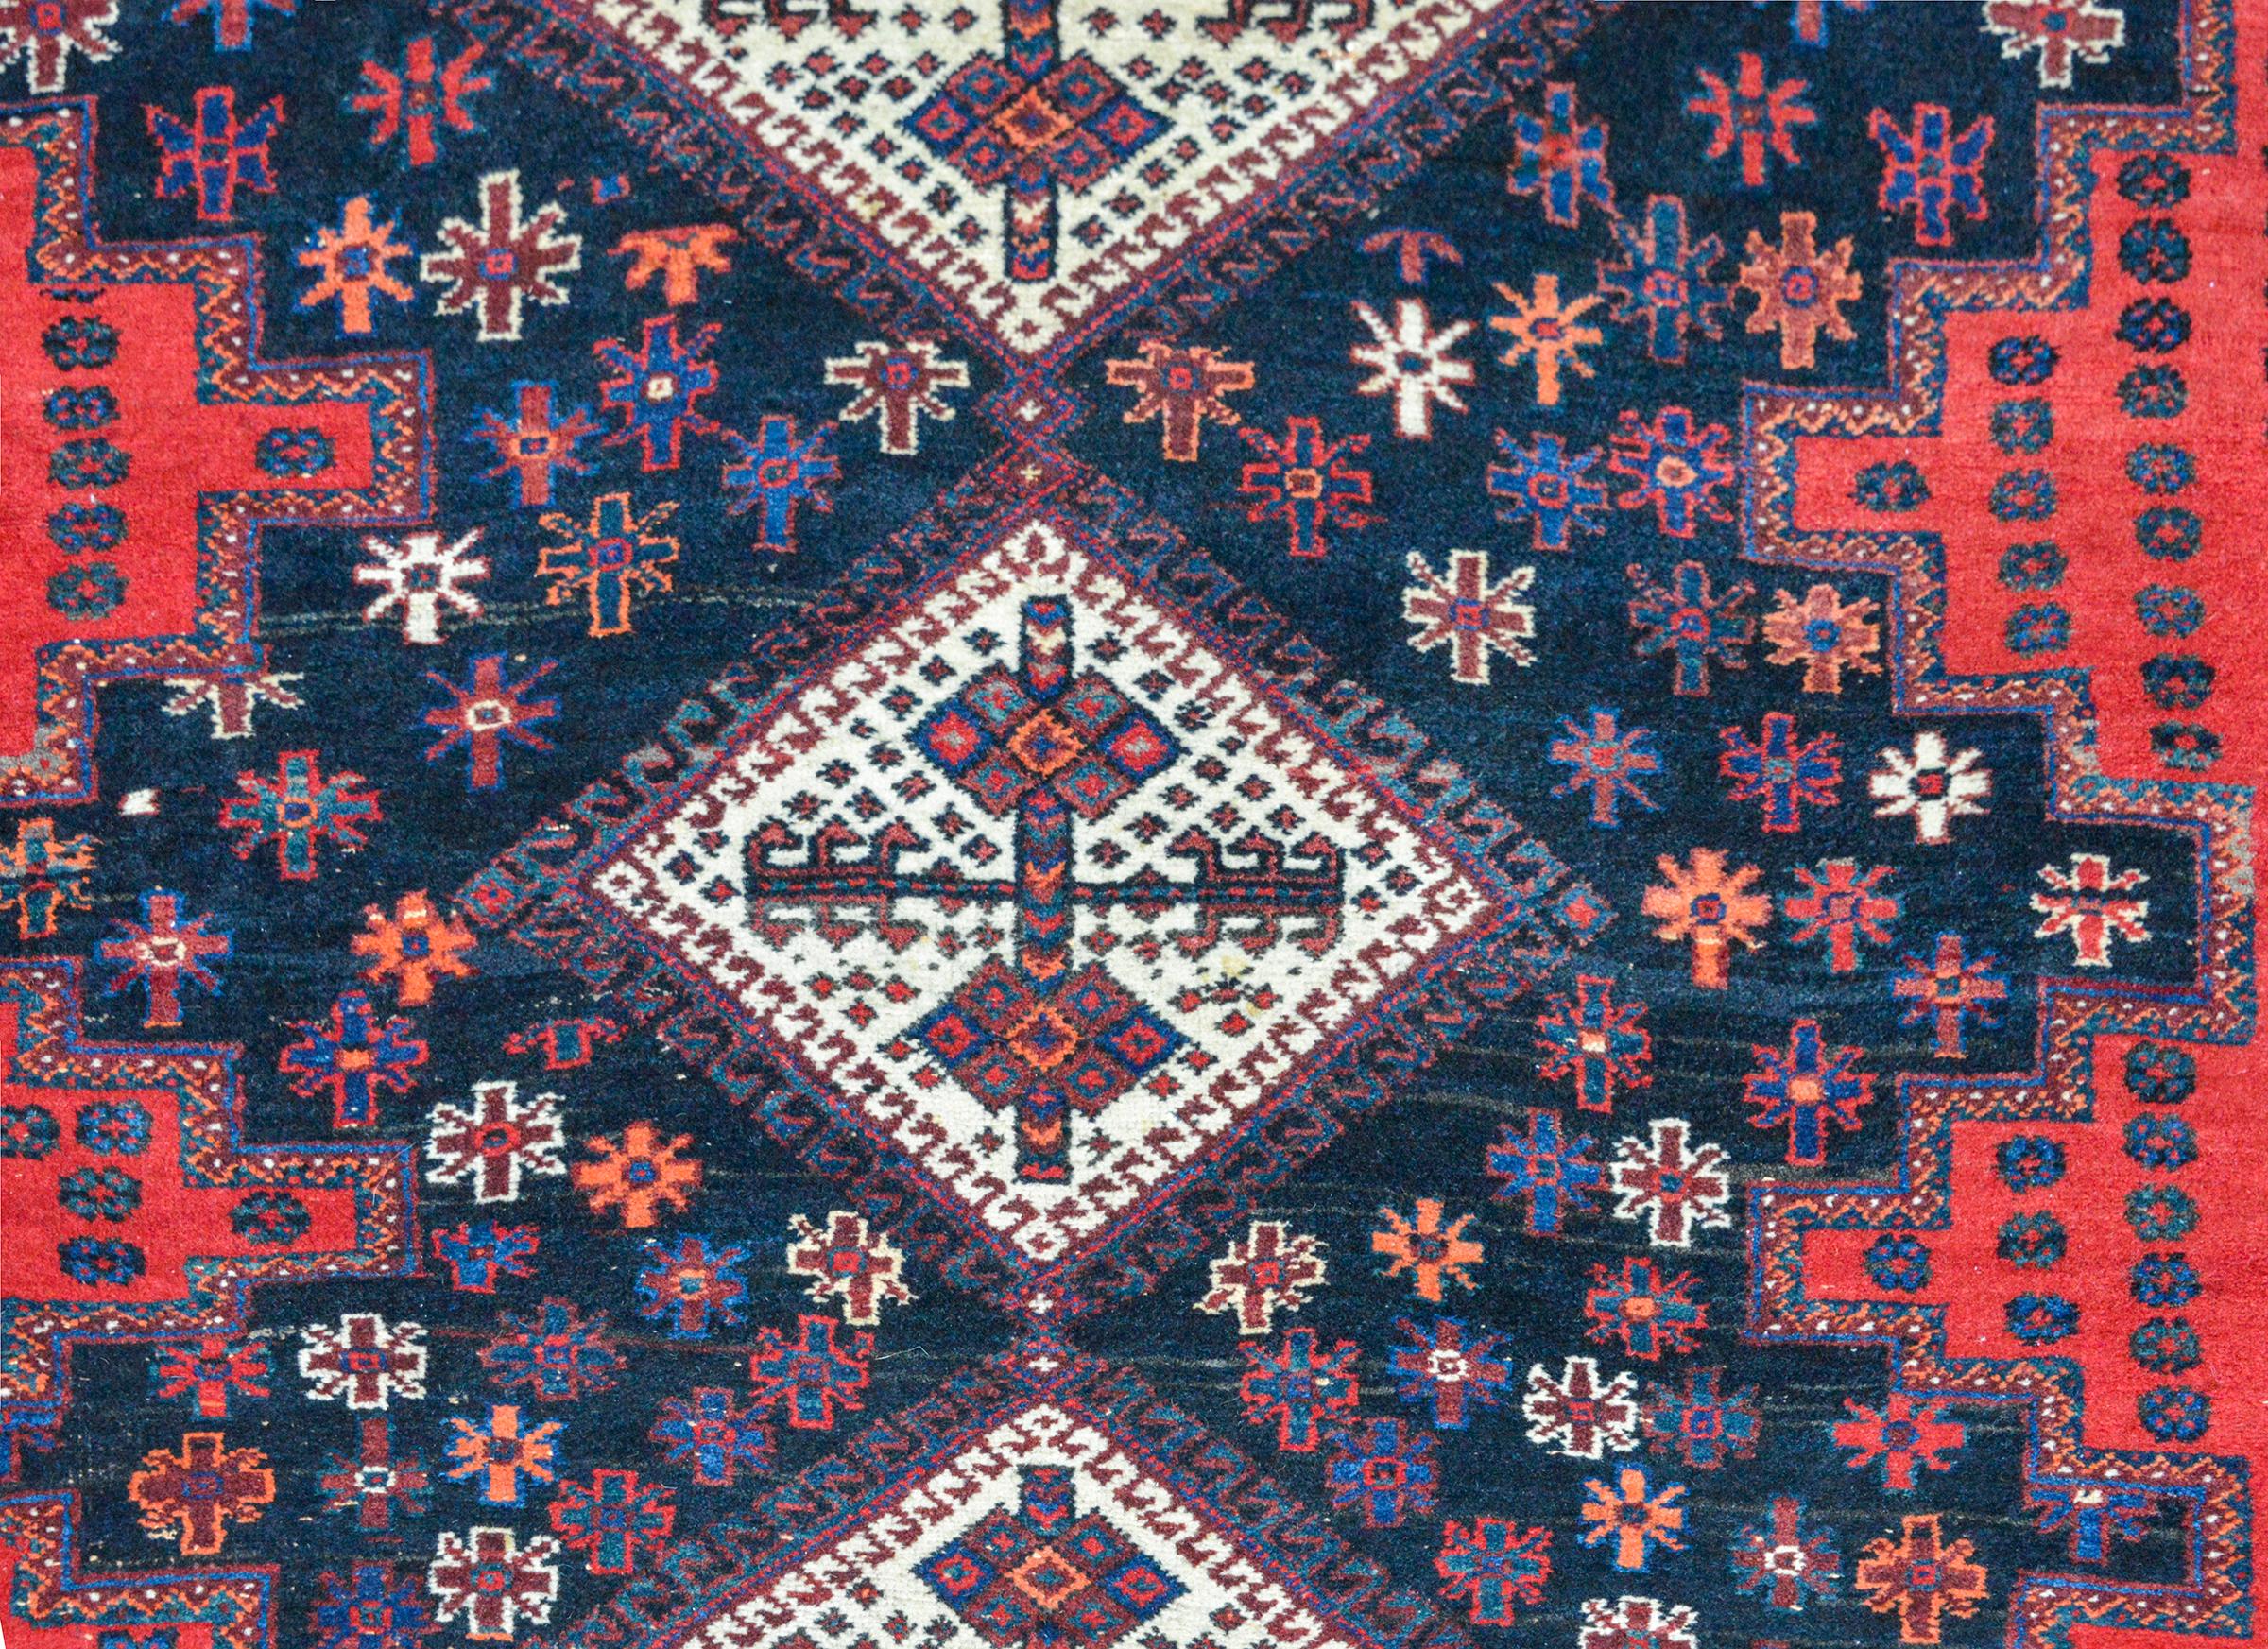 Vintage Persian Mazlaghan rug with a bold geometric pattern woven with three large white diamond medallions amidst a field of stylized flowers against a dark indigo background. The border is striking, with multiple petite and large-scale geometric